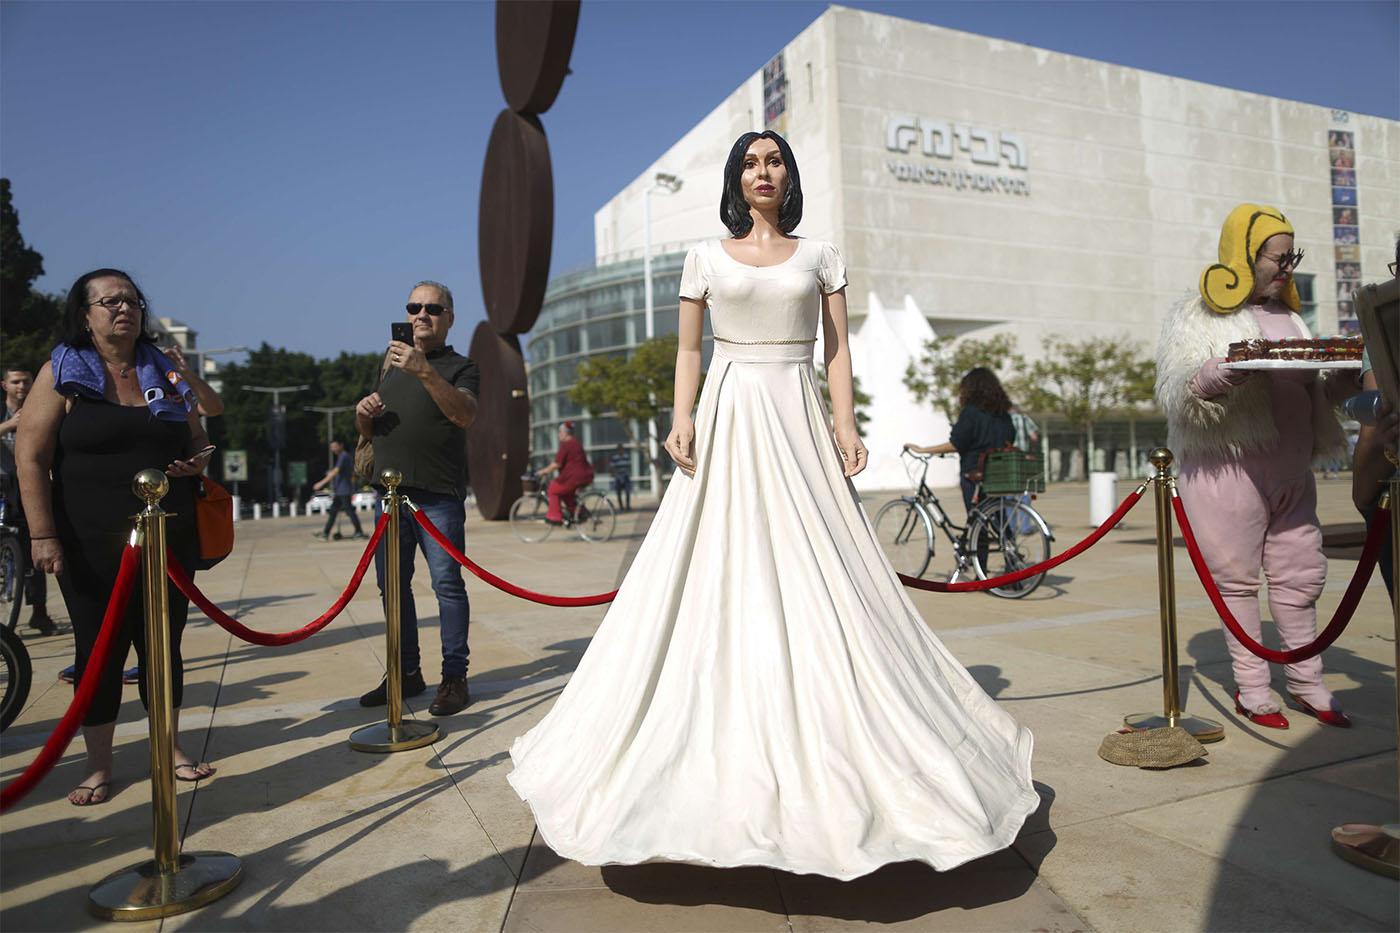 Israeli artist Itay Zalait set up his depiction of Miri Regev as a protest of her pushing for legislation mandating ???loyalty??? in cultural works